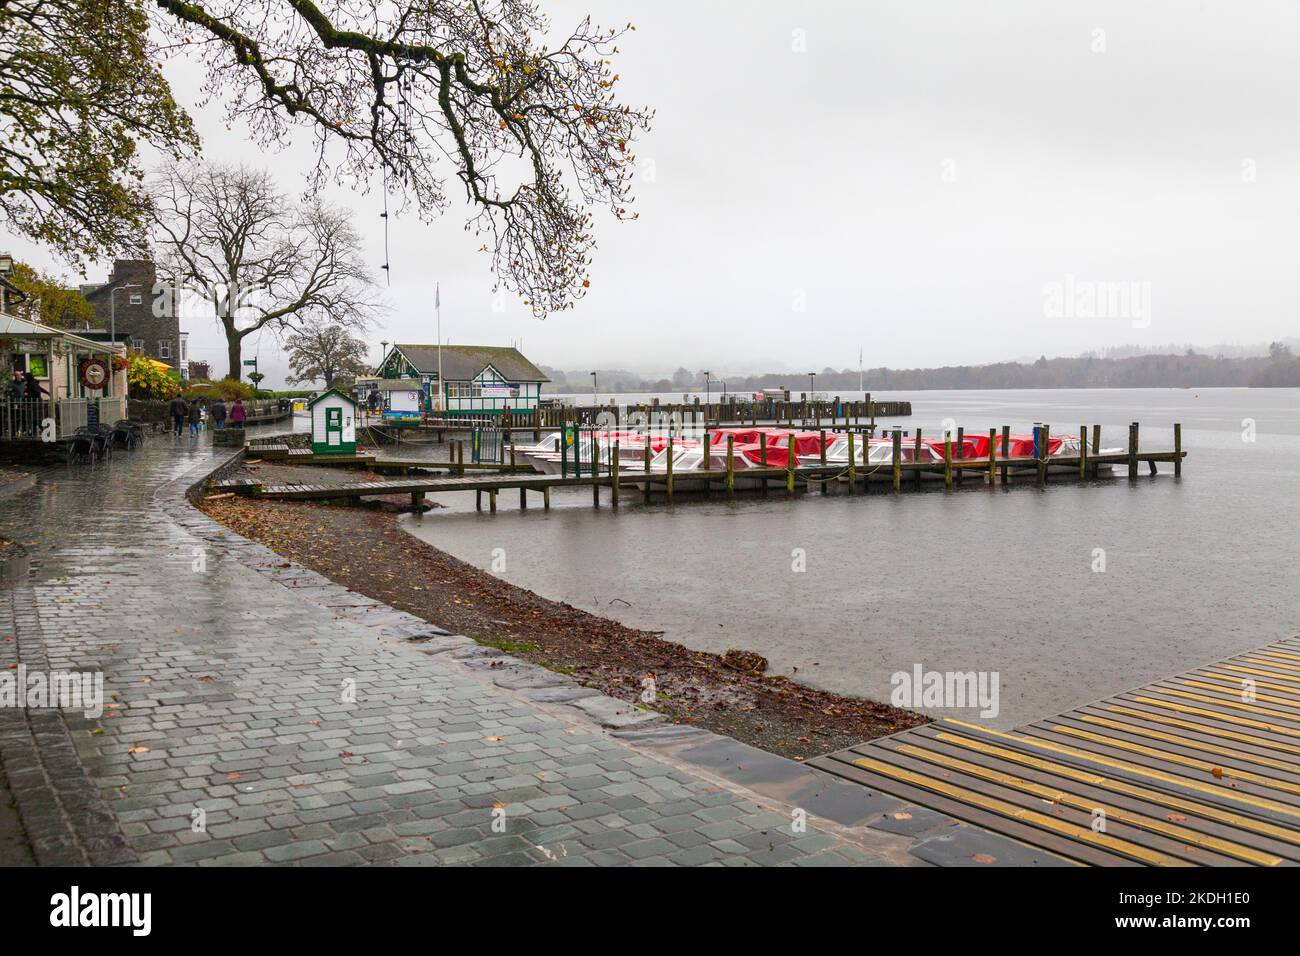 Ambleside Pier and wooden jetty in the Lake District National Park with Lake Windermere on a wet, gloomy, overcast day Stock Photo